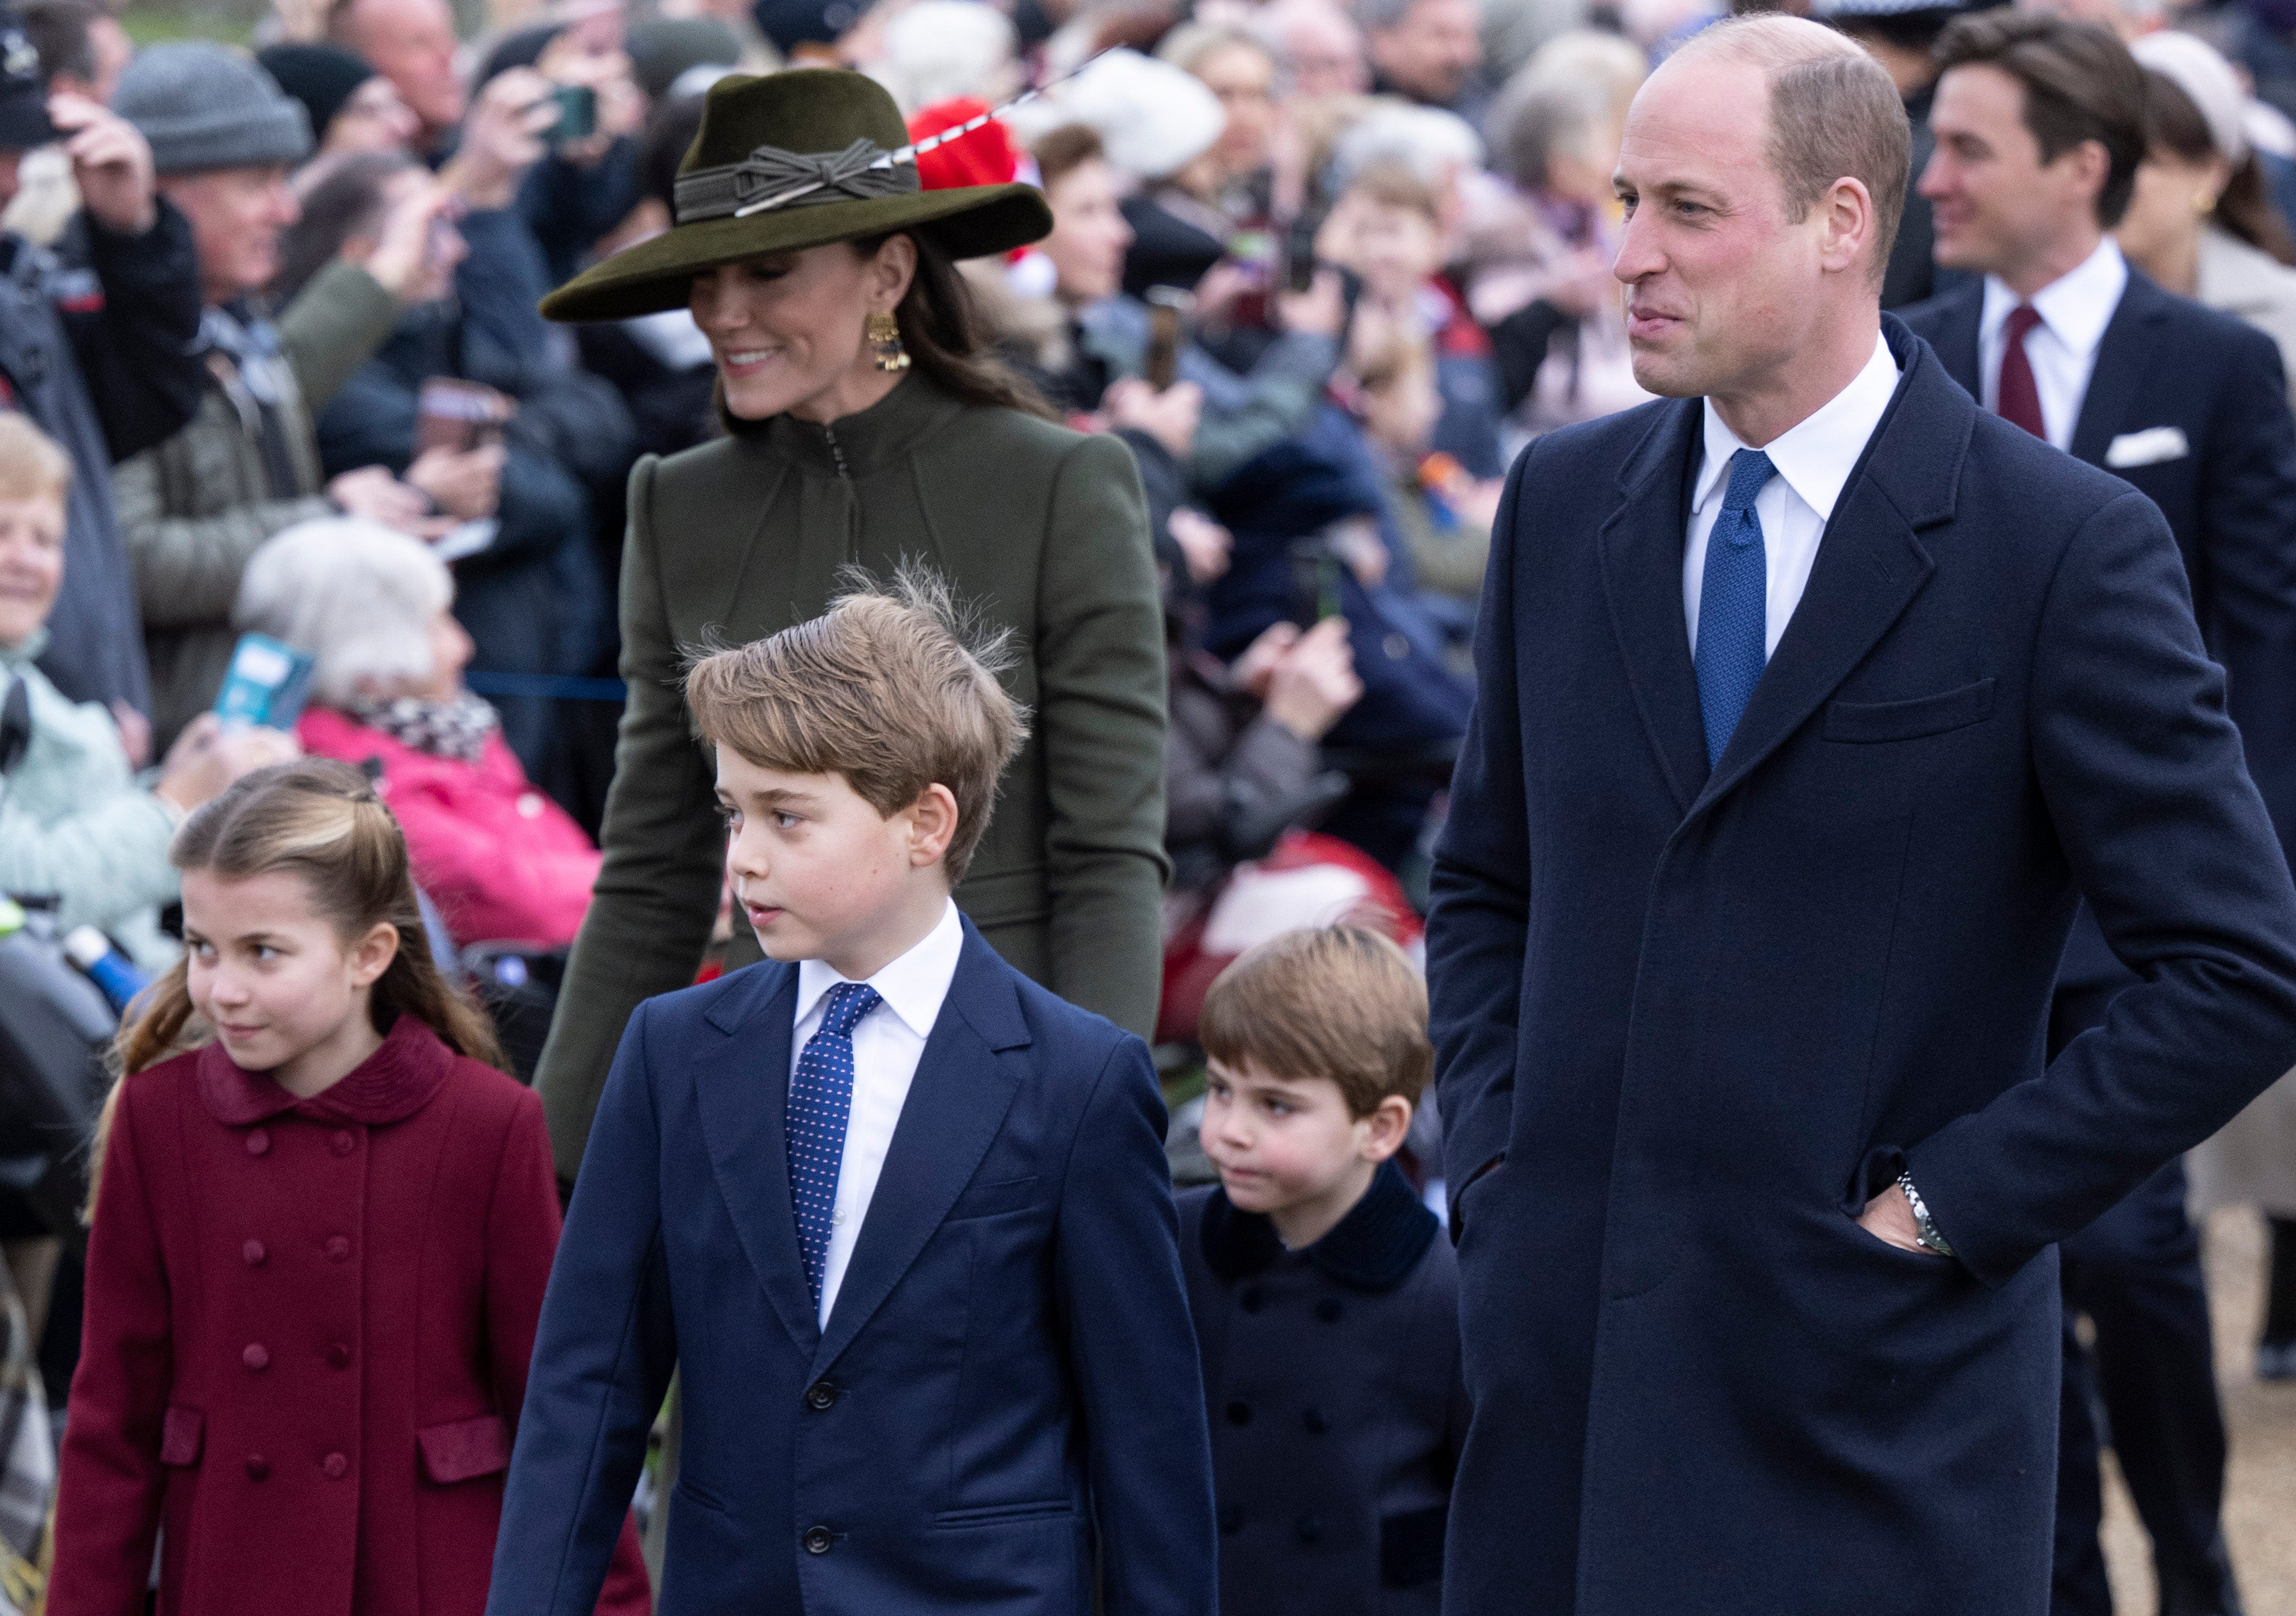 William and Kate's new royal traditions - by Emily Nash